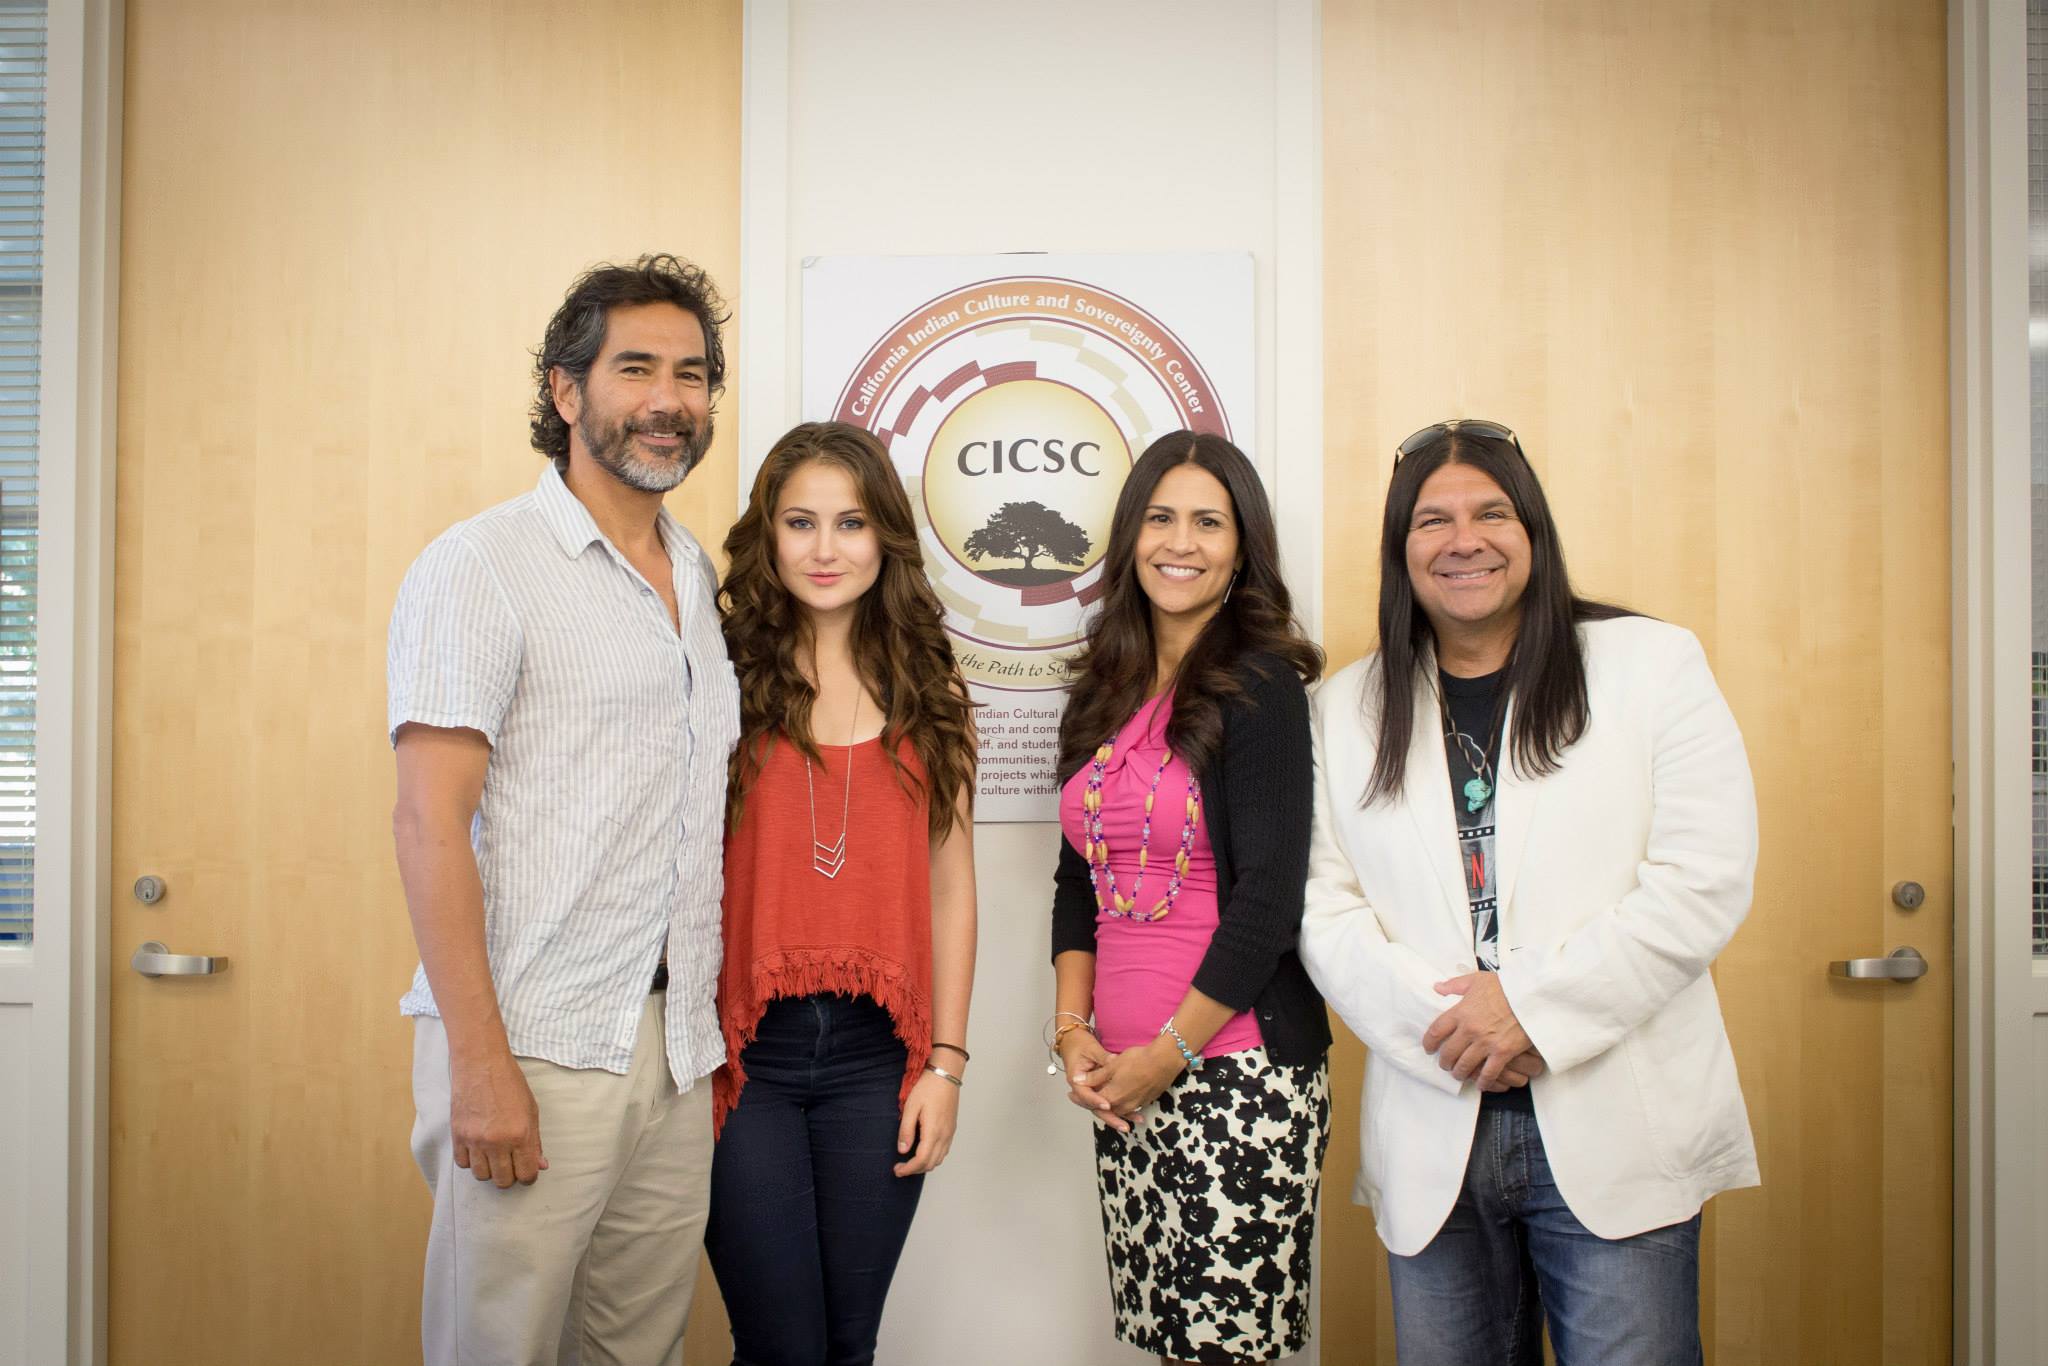 Bella King, Ruben CHATO Hinajosa, and Randy Vasquez standing with Joely Proudfit in front of a sign displaying the CICSC logo on a white wall in between two wooden doors in the CICSC center on campus